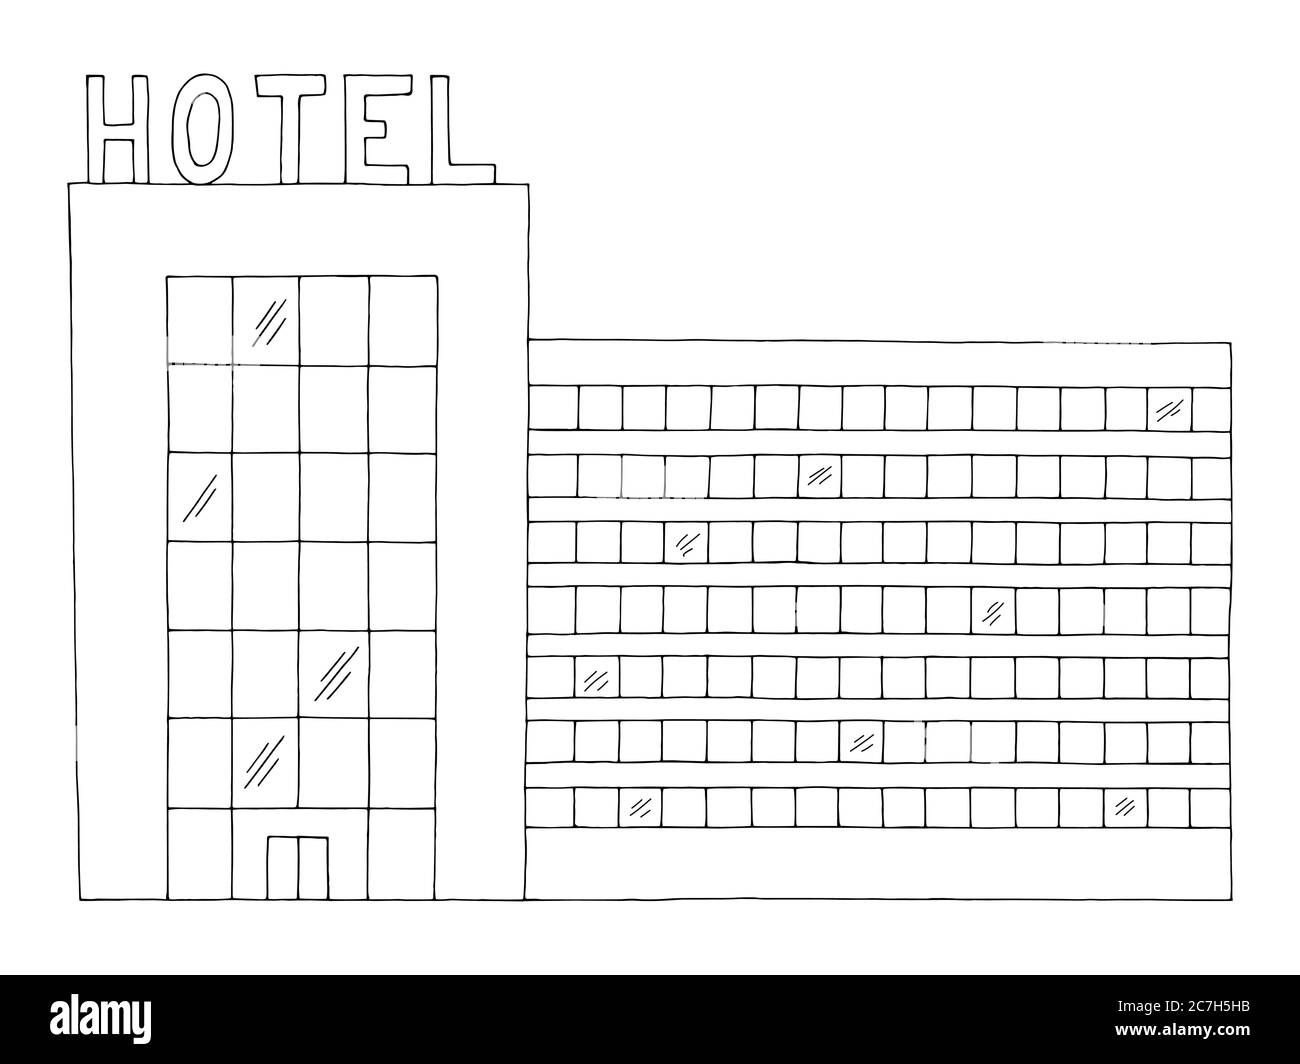 Hotel building exterior front view graphic black white sketch illustration vector Stock Vector